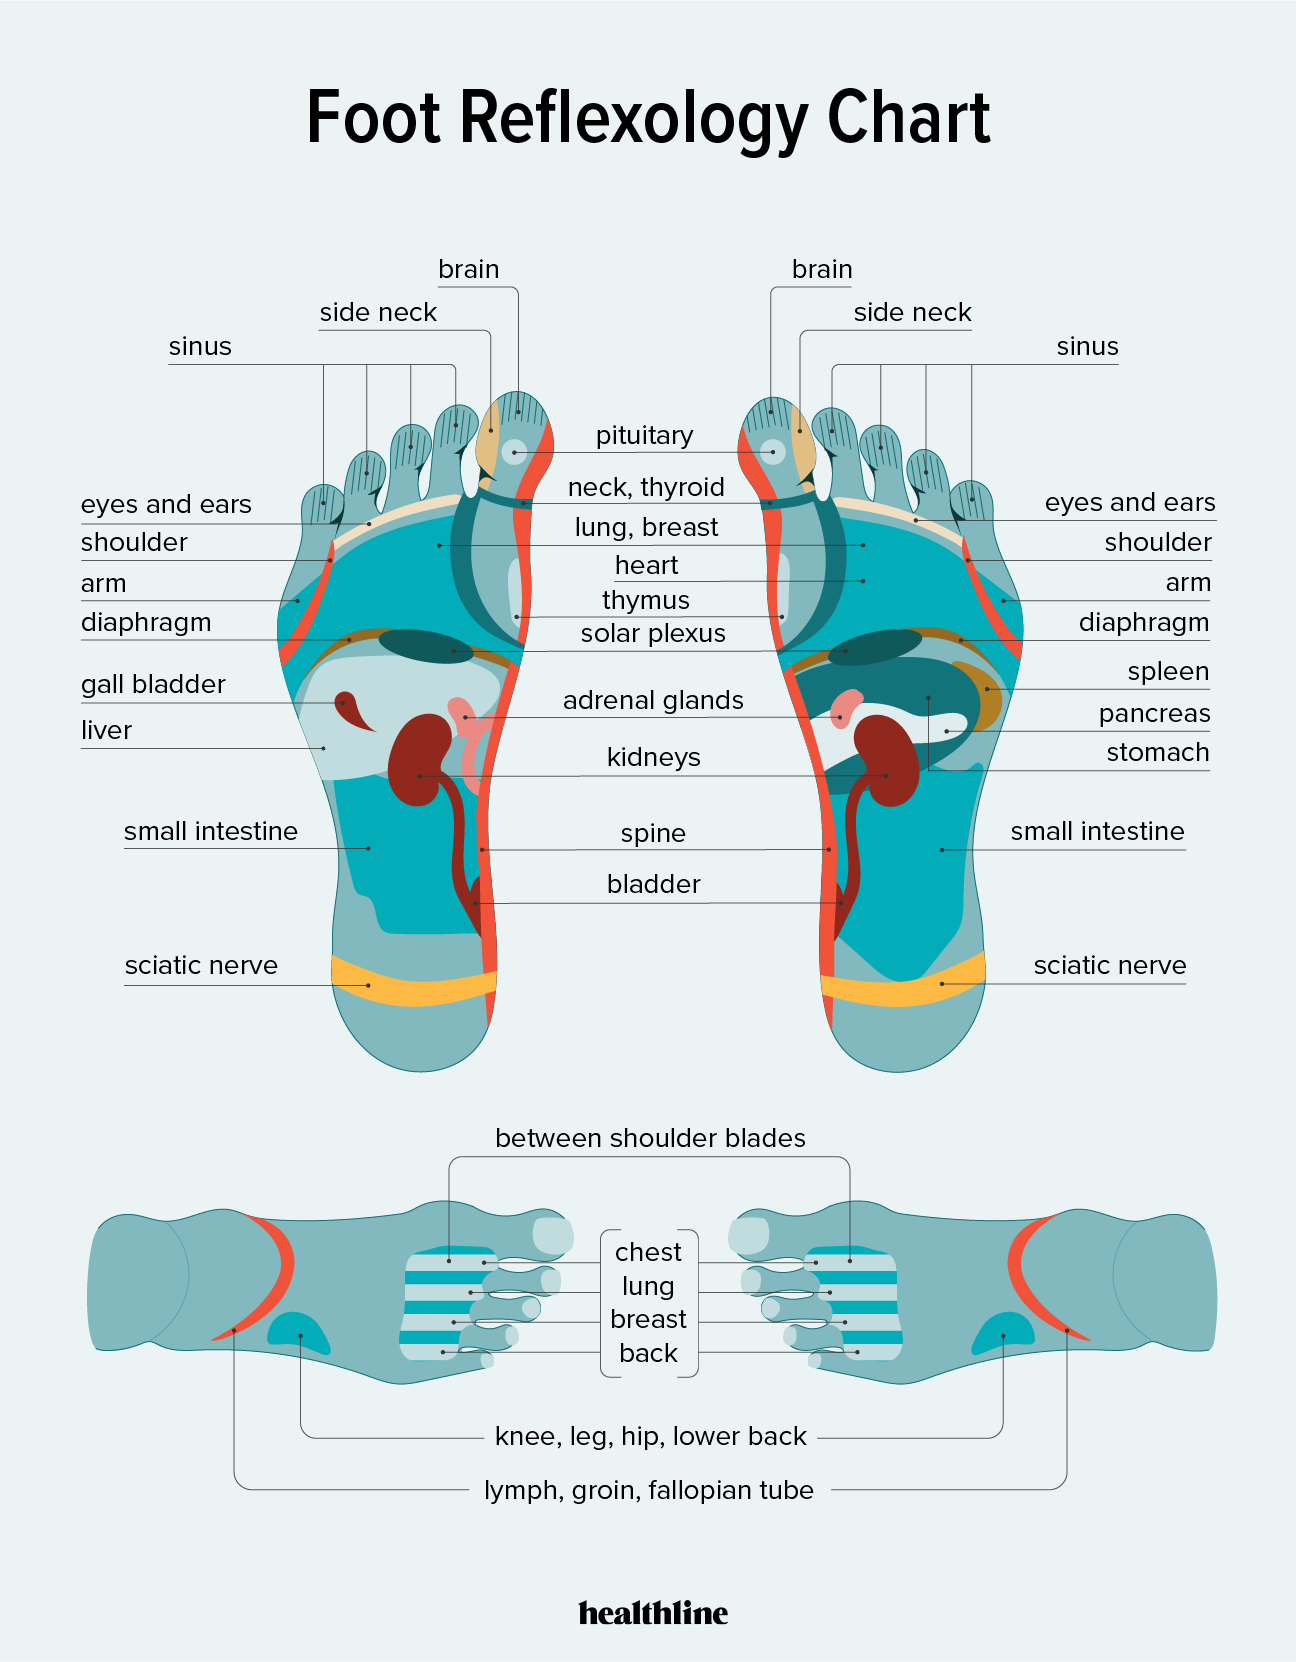 foot-reflexology-chart-points-how-to-benefits-and-risks